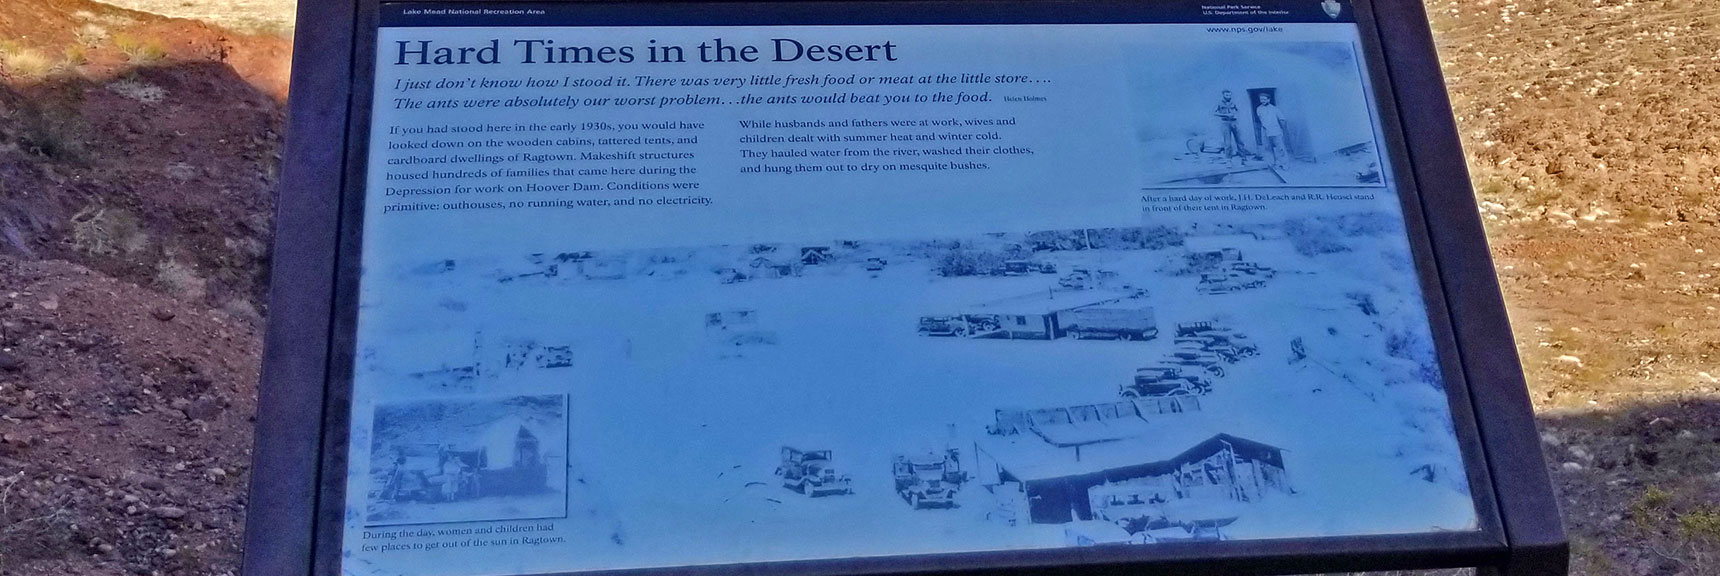 Workers at Hoover Dam Lived in Primative "Ragtown" on the Shore of the Colorado River | Historic Railroad Trail | Lake Mead National Recreation Area, Nevada